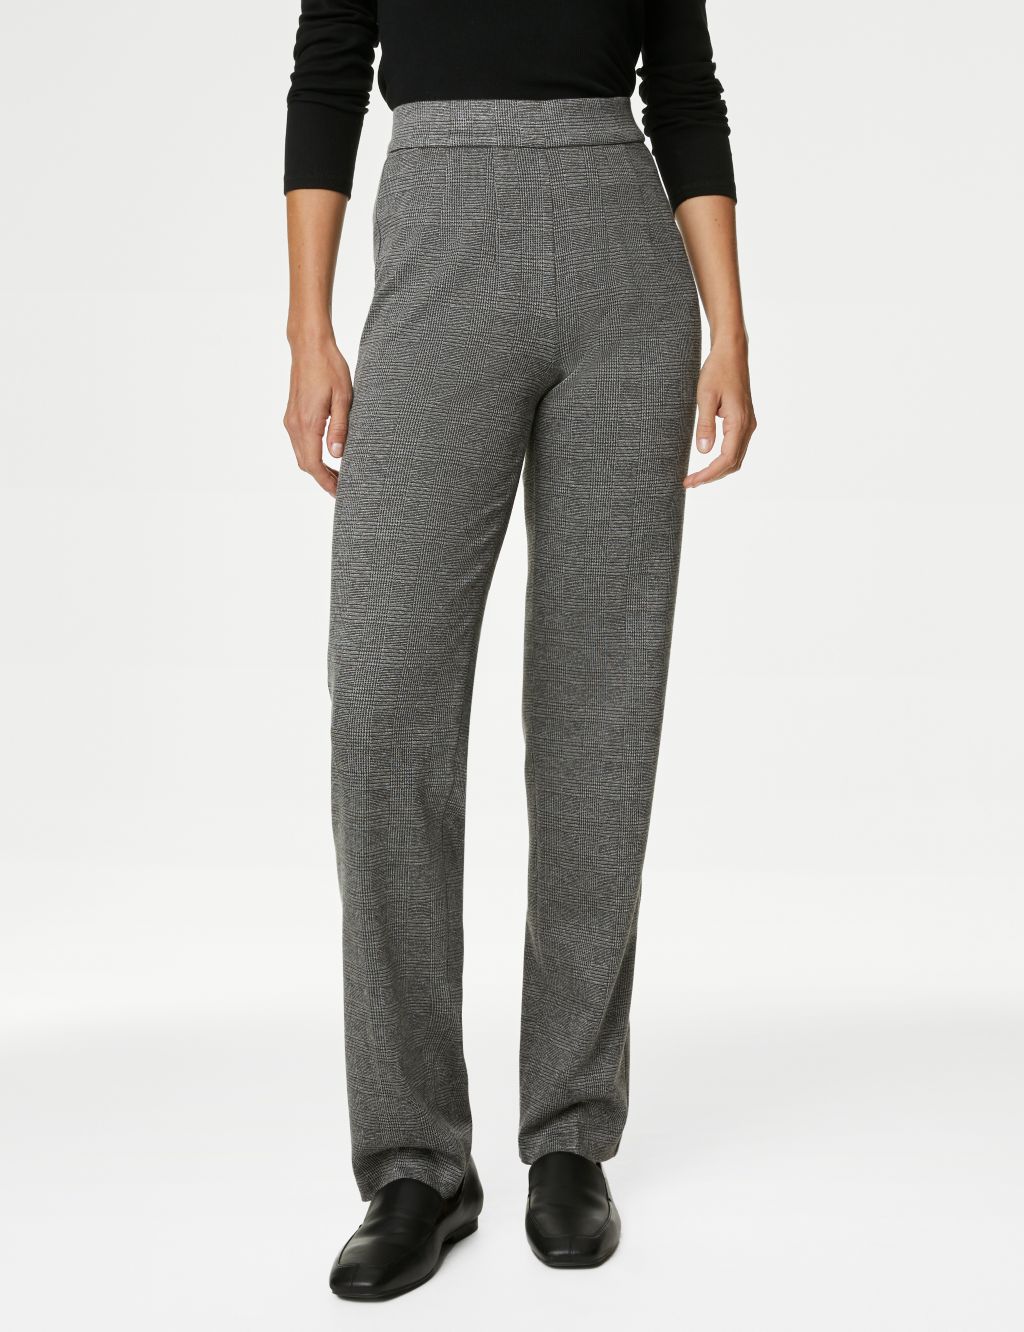 Jersey Checked Straight Leg Trousers image 4